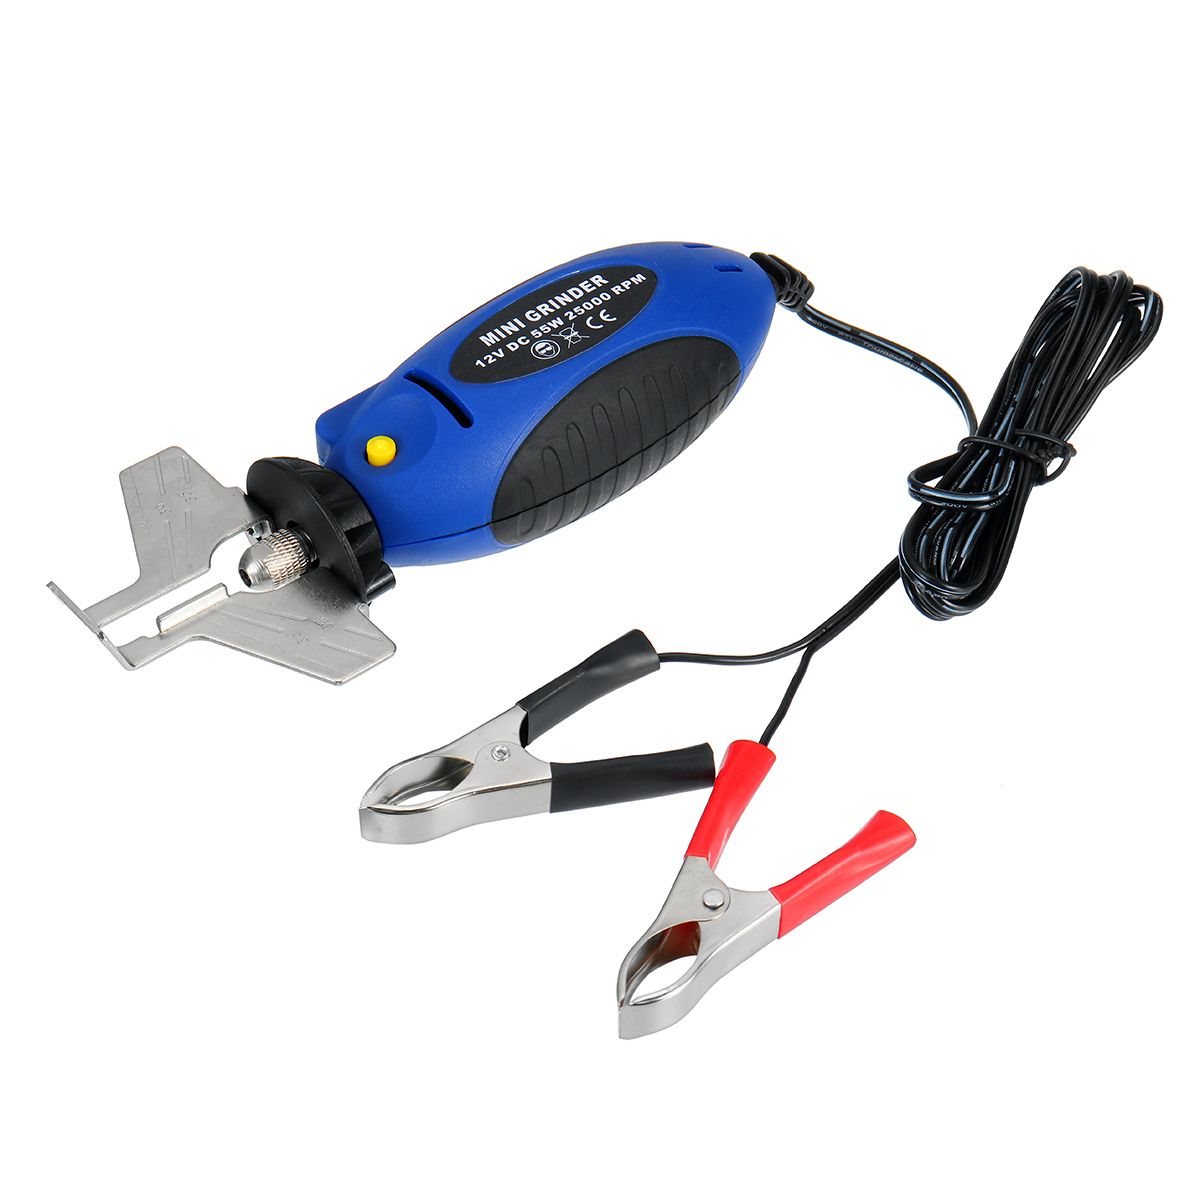 25000RPM-12V-Chain-Saw-Sharpener-Chainsaw-Electric-Mini-Grinder-File-Milling-Tool-1749242